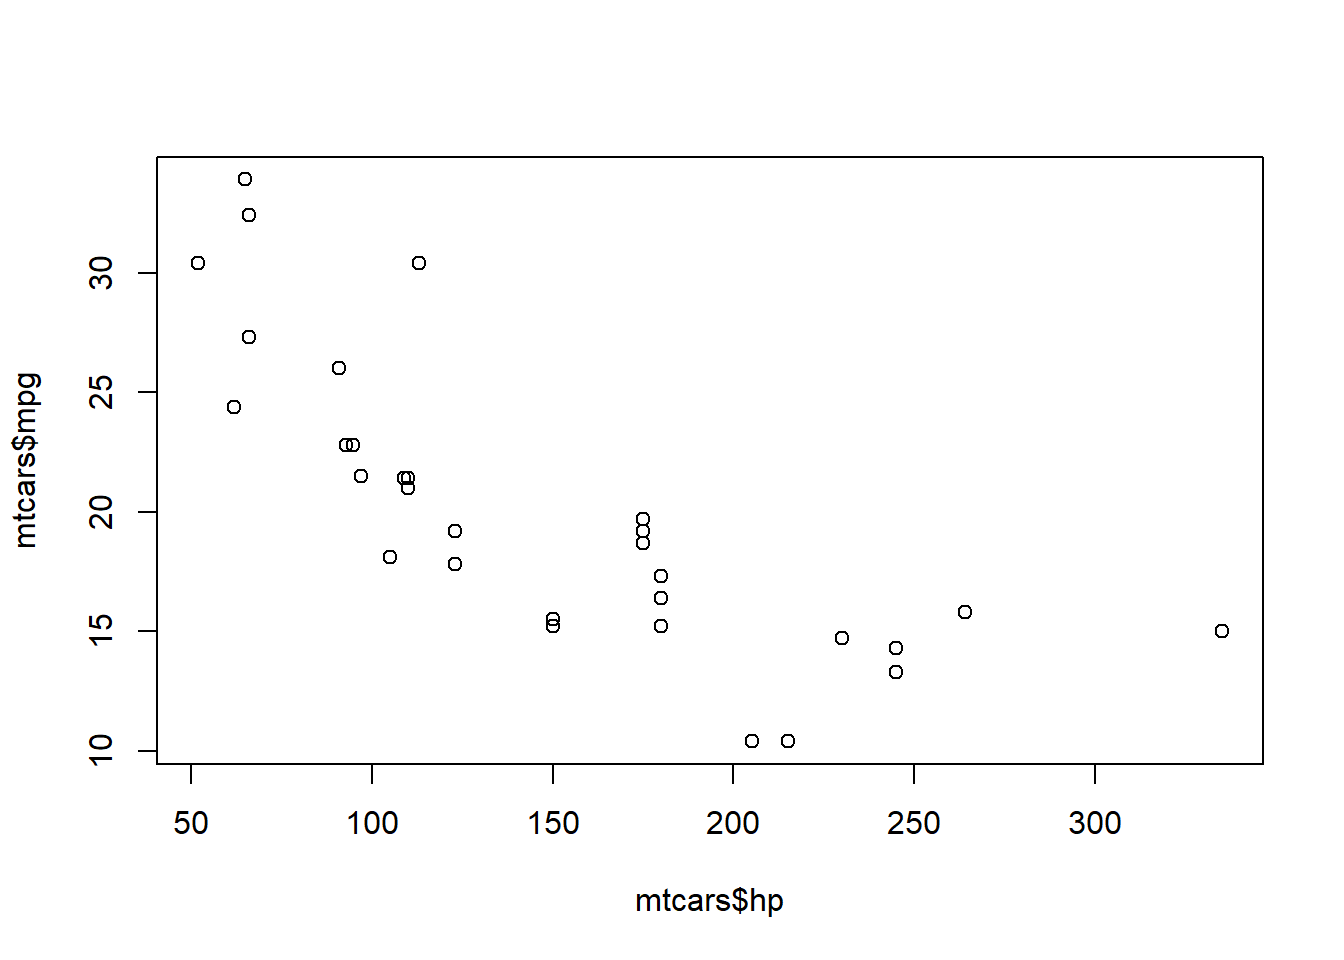 Relationship between horsepower and miles per gallon